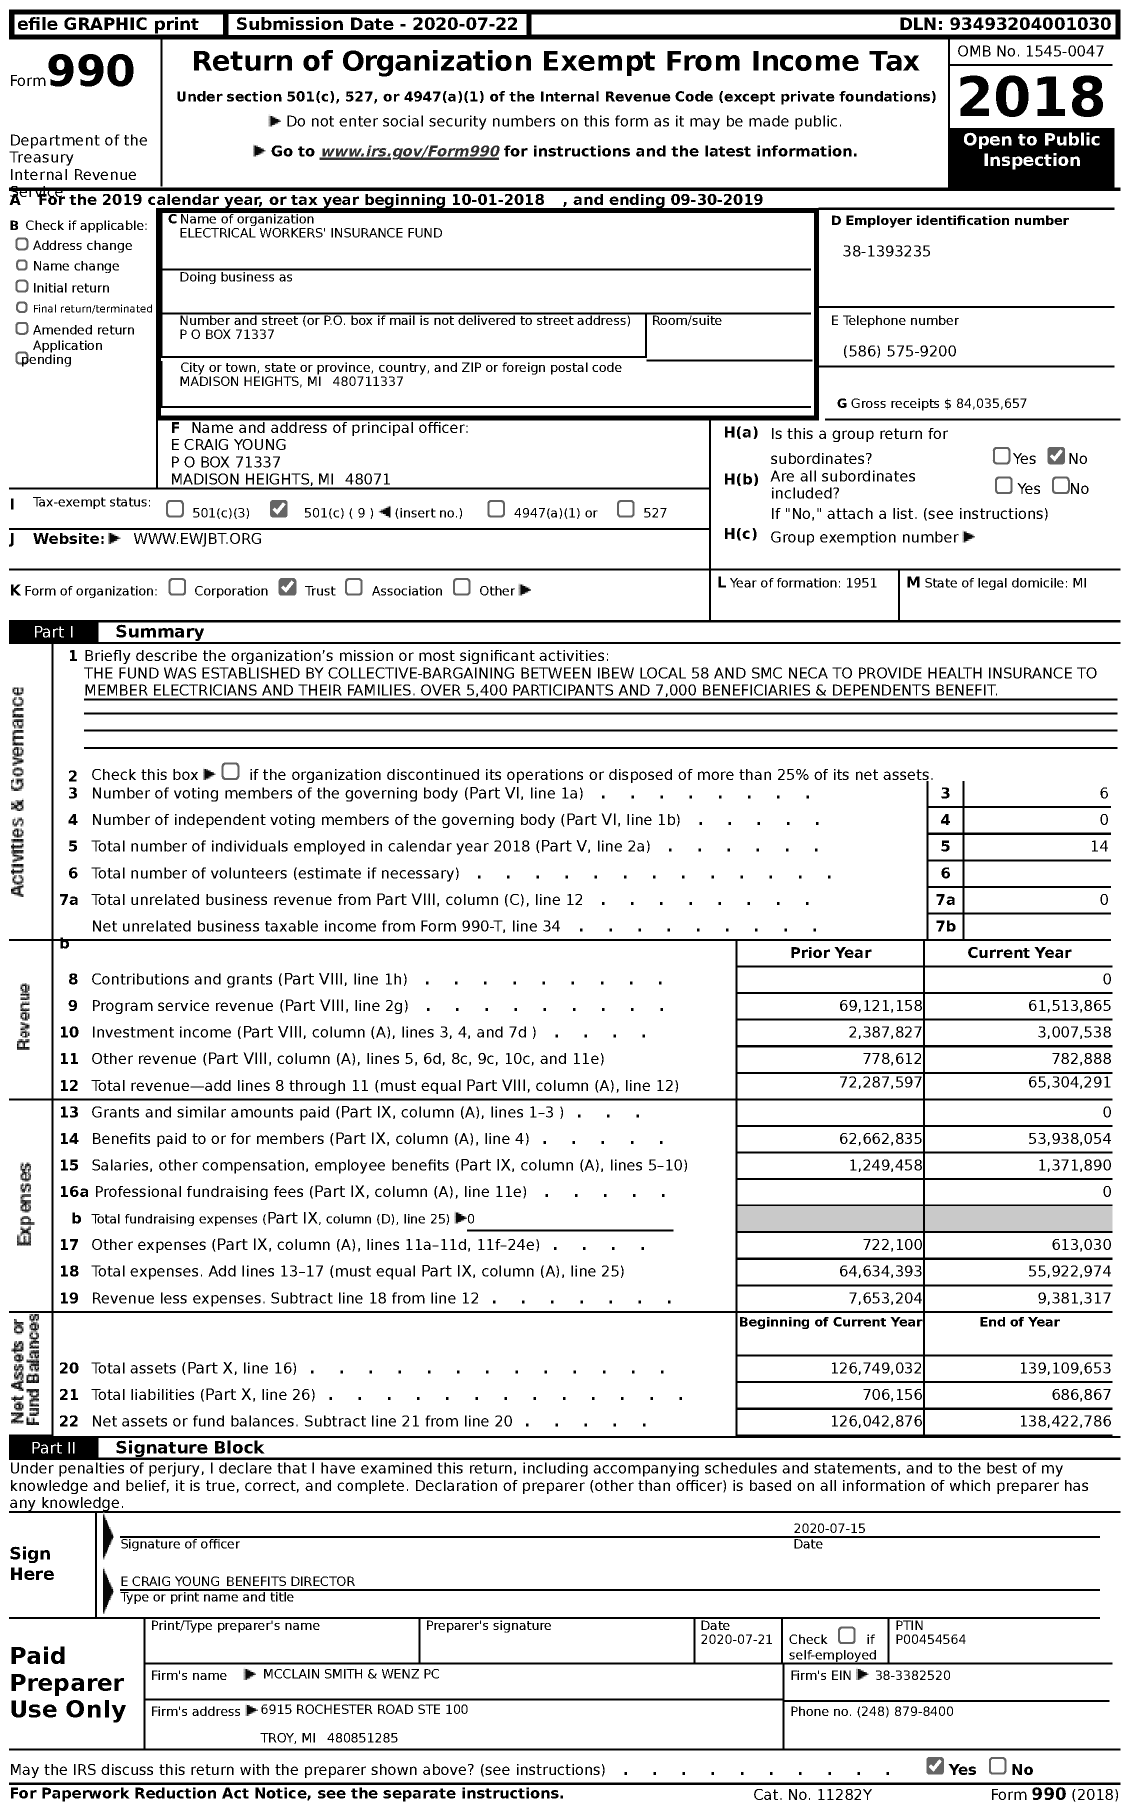 Image of first page of 2018 Form 990 for Electrical Workers' Insurance Fund